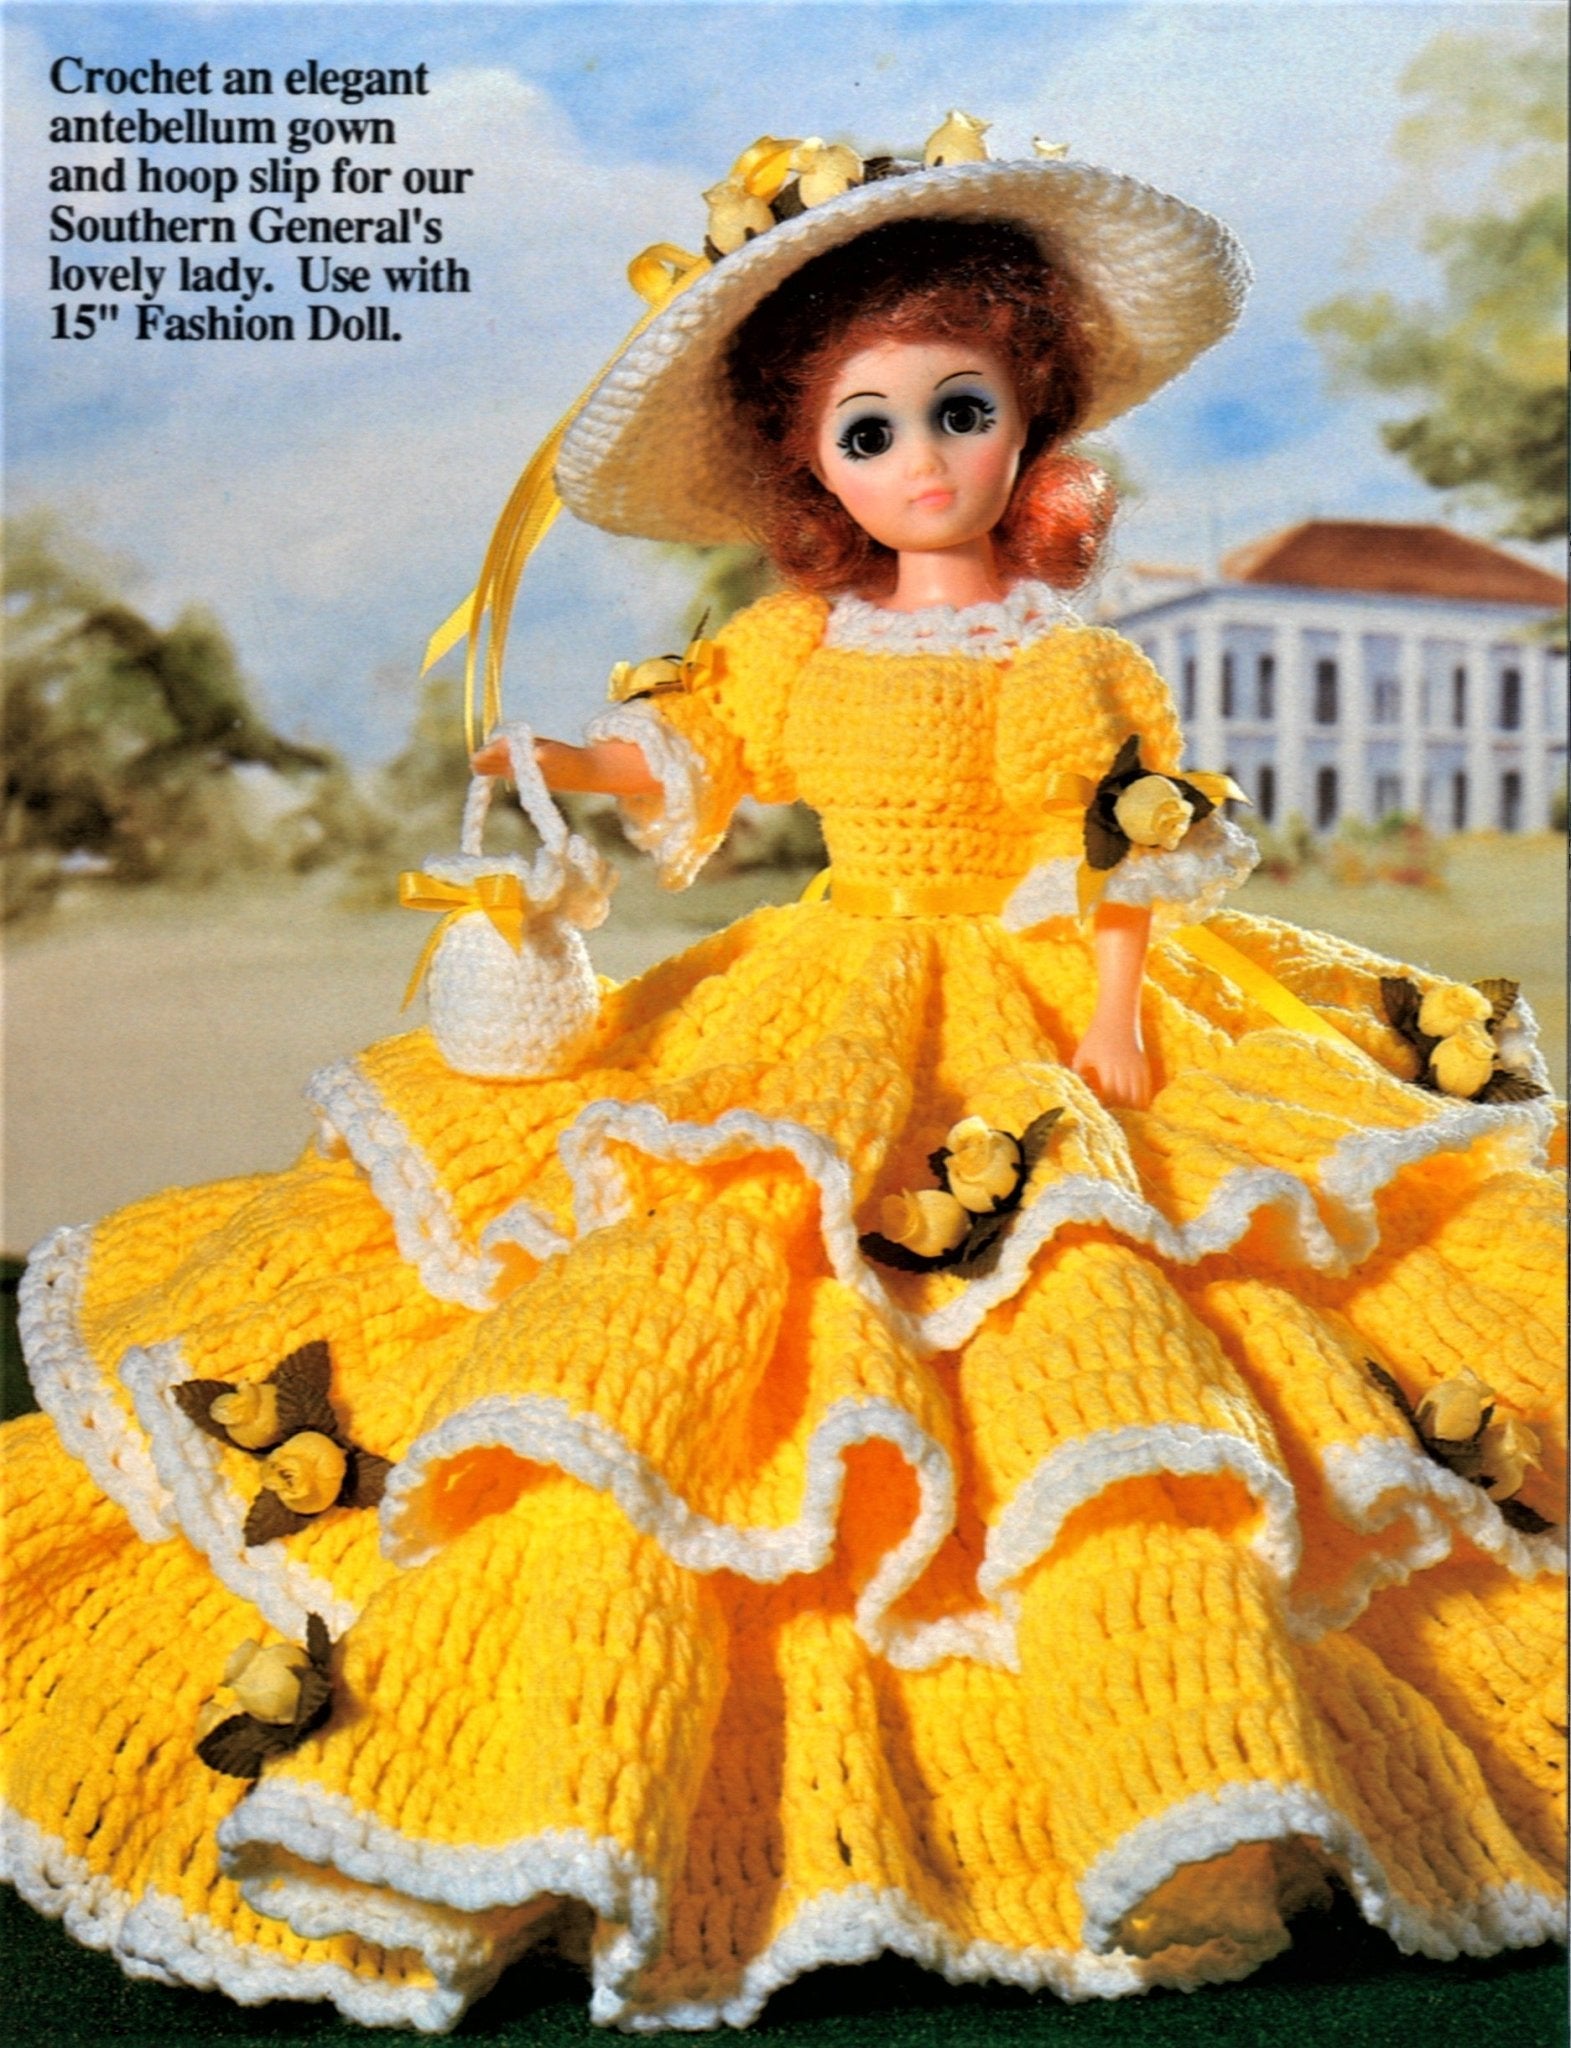 BARBIE Ball Gown Doll - Ball Gown Doll . Buy Doll toys in India. shop for  BARBIE products in India. | Flipkart.com